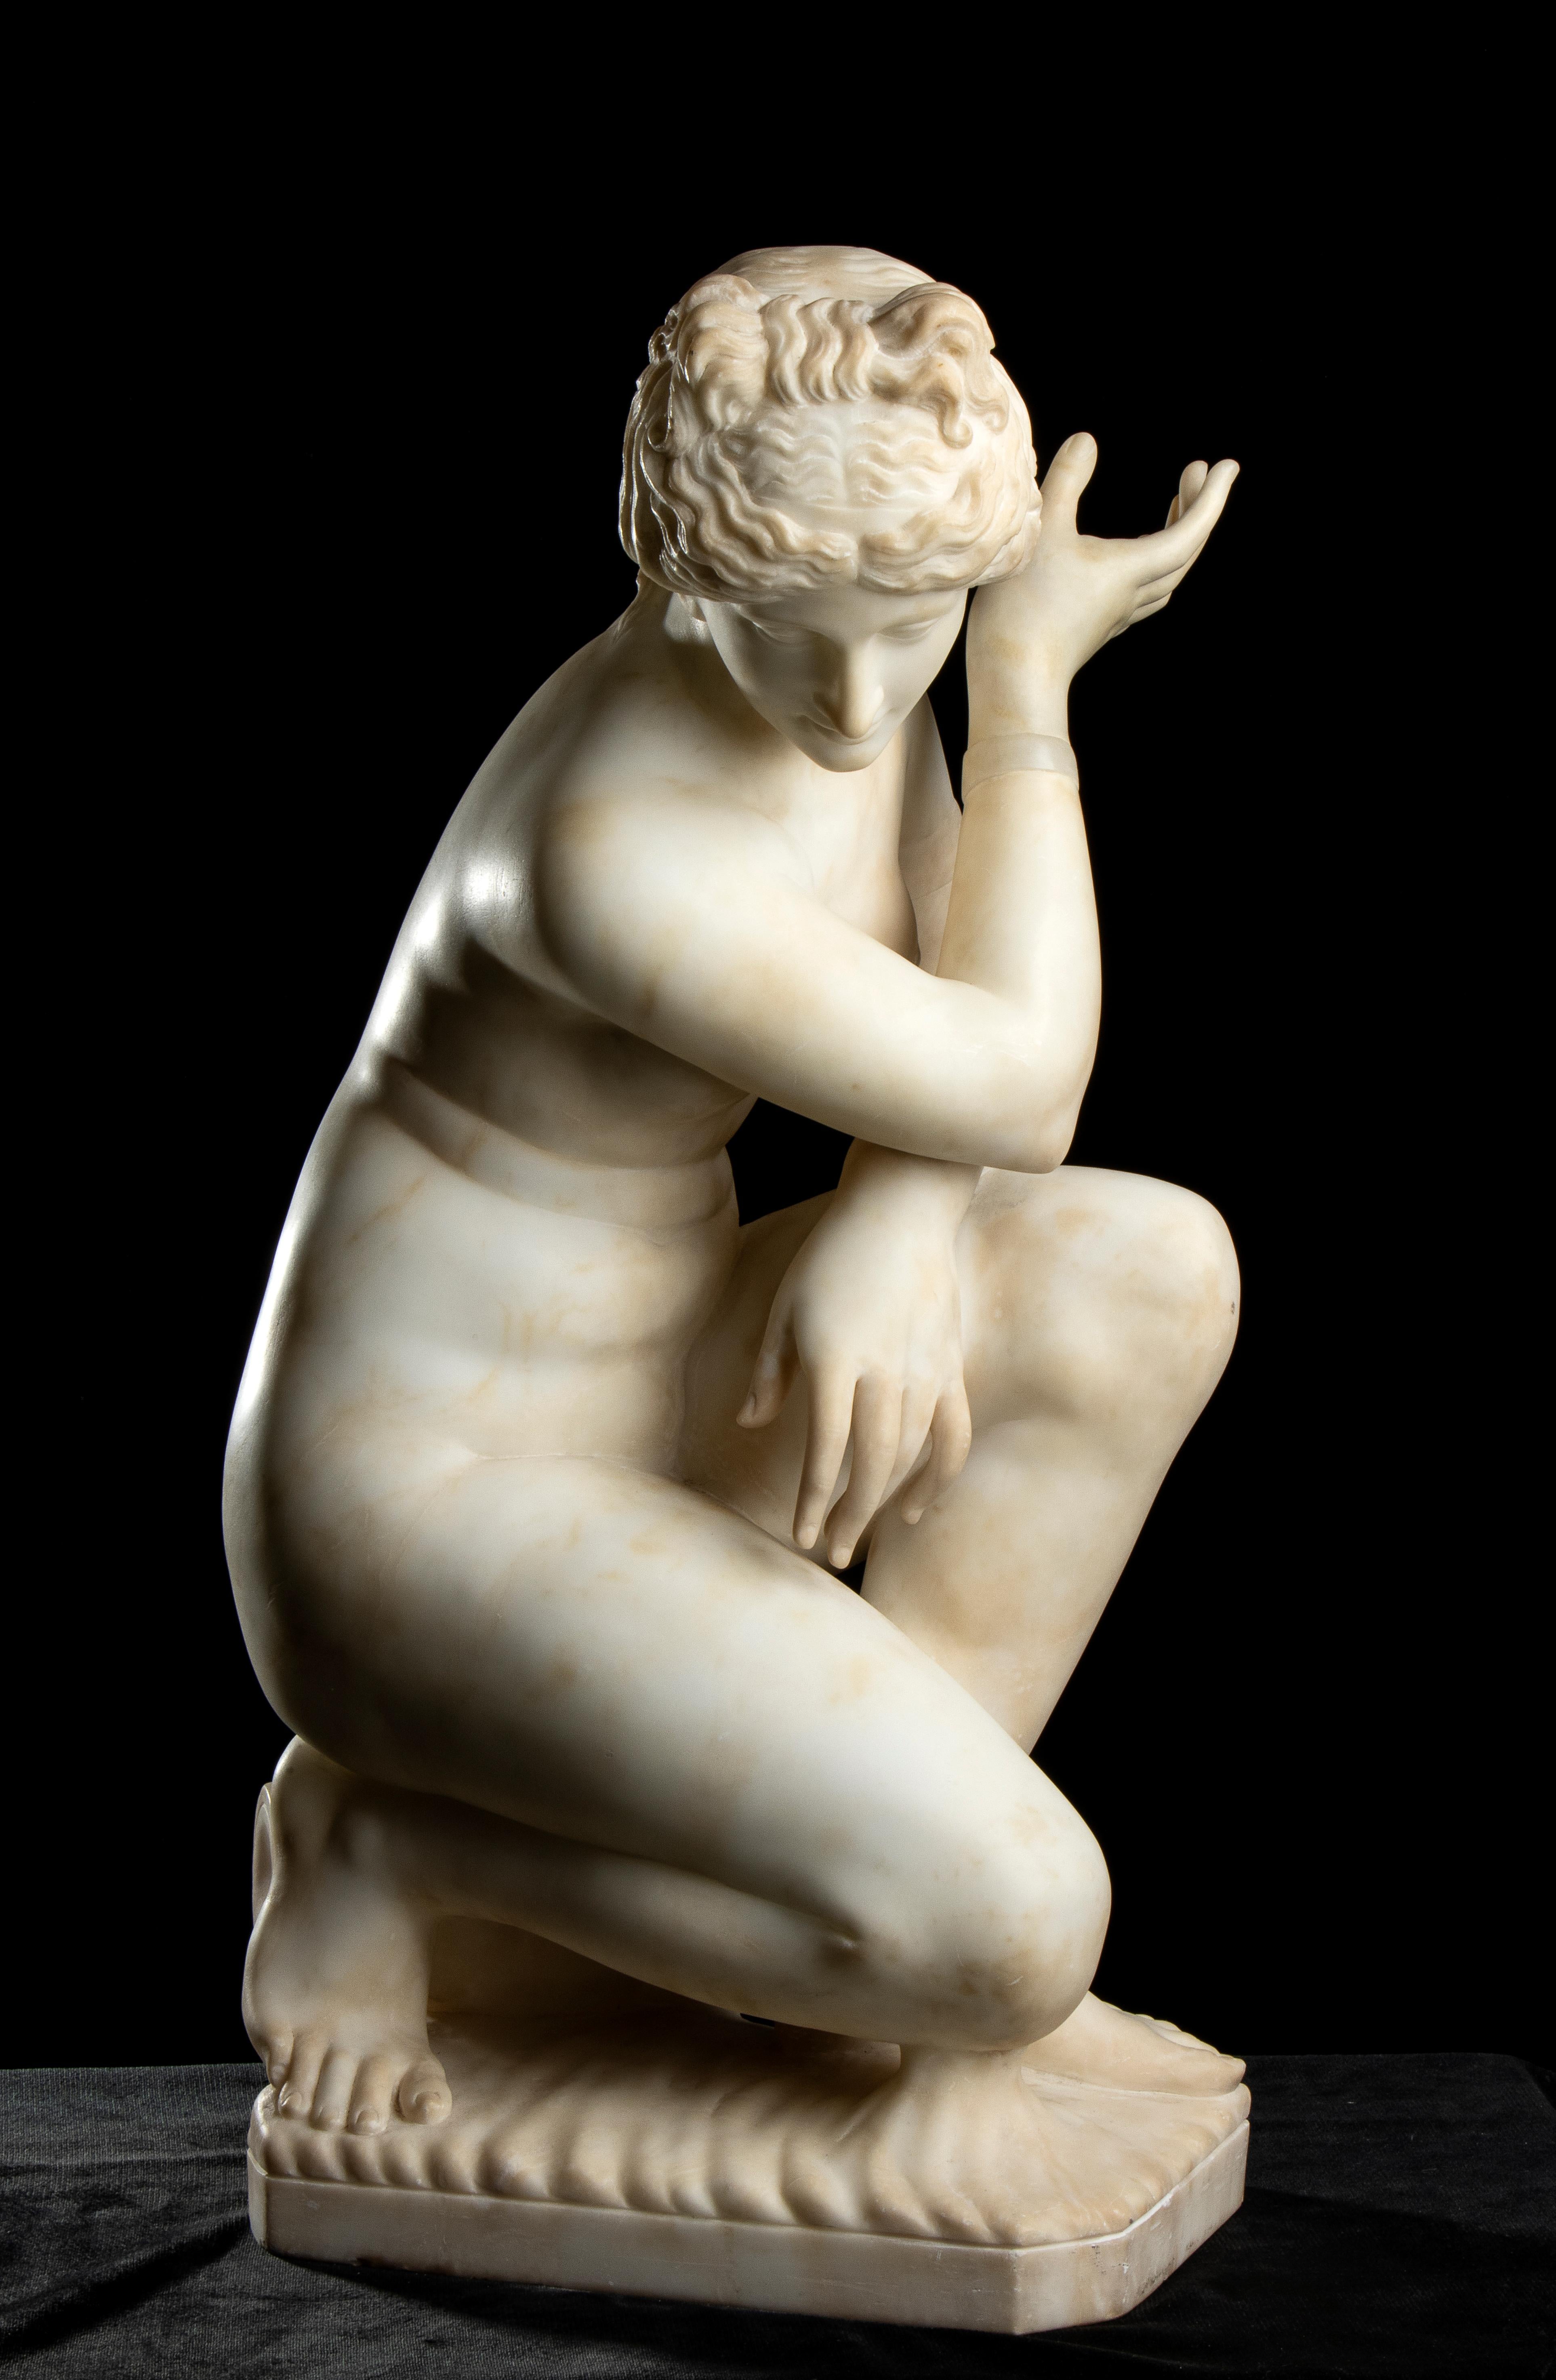 An important grand tour sculpture of the crouching Venus carved in white alabaster .  The original Crouching Aphrodite was a bronze sculpture by Doidalsa, datable to 250 BC. approximately and today known only from copies of the Roman era, among